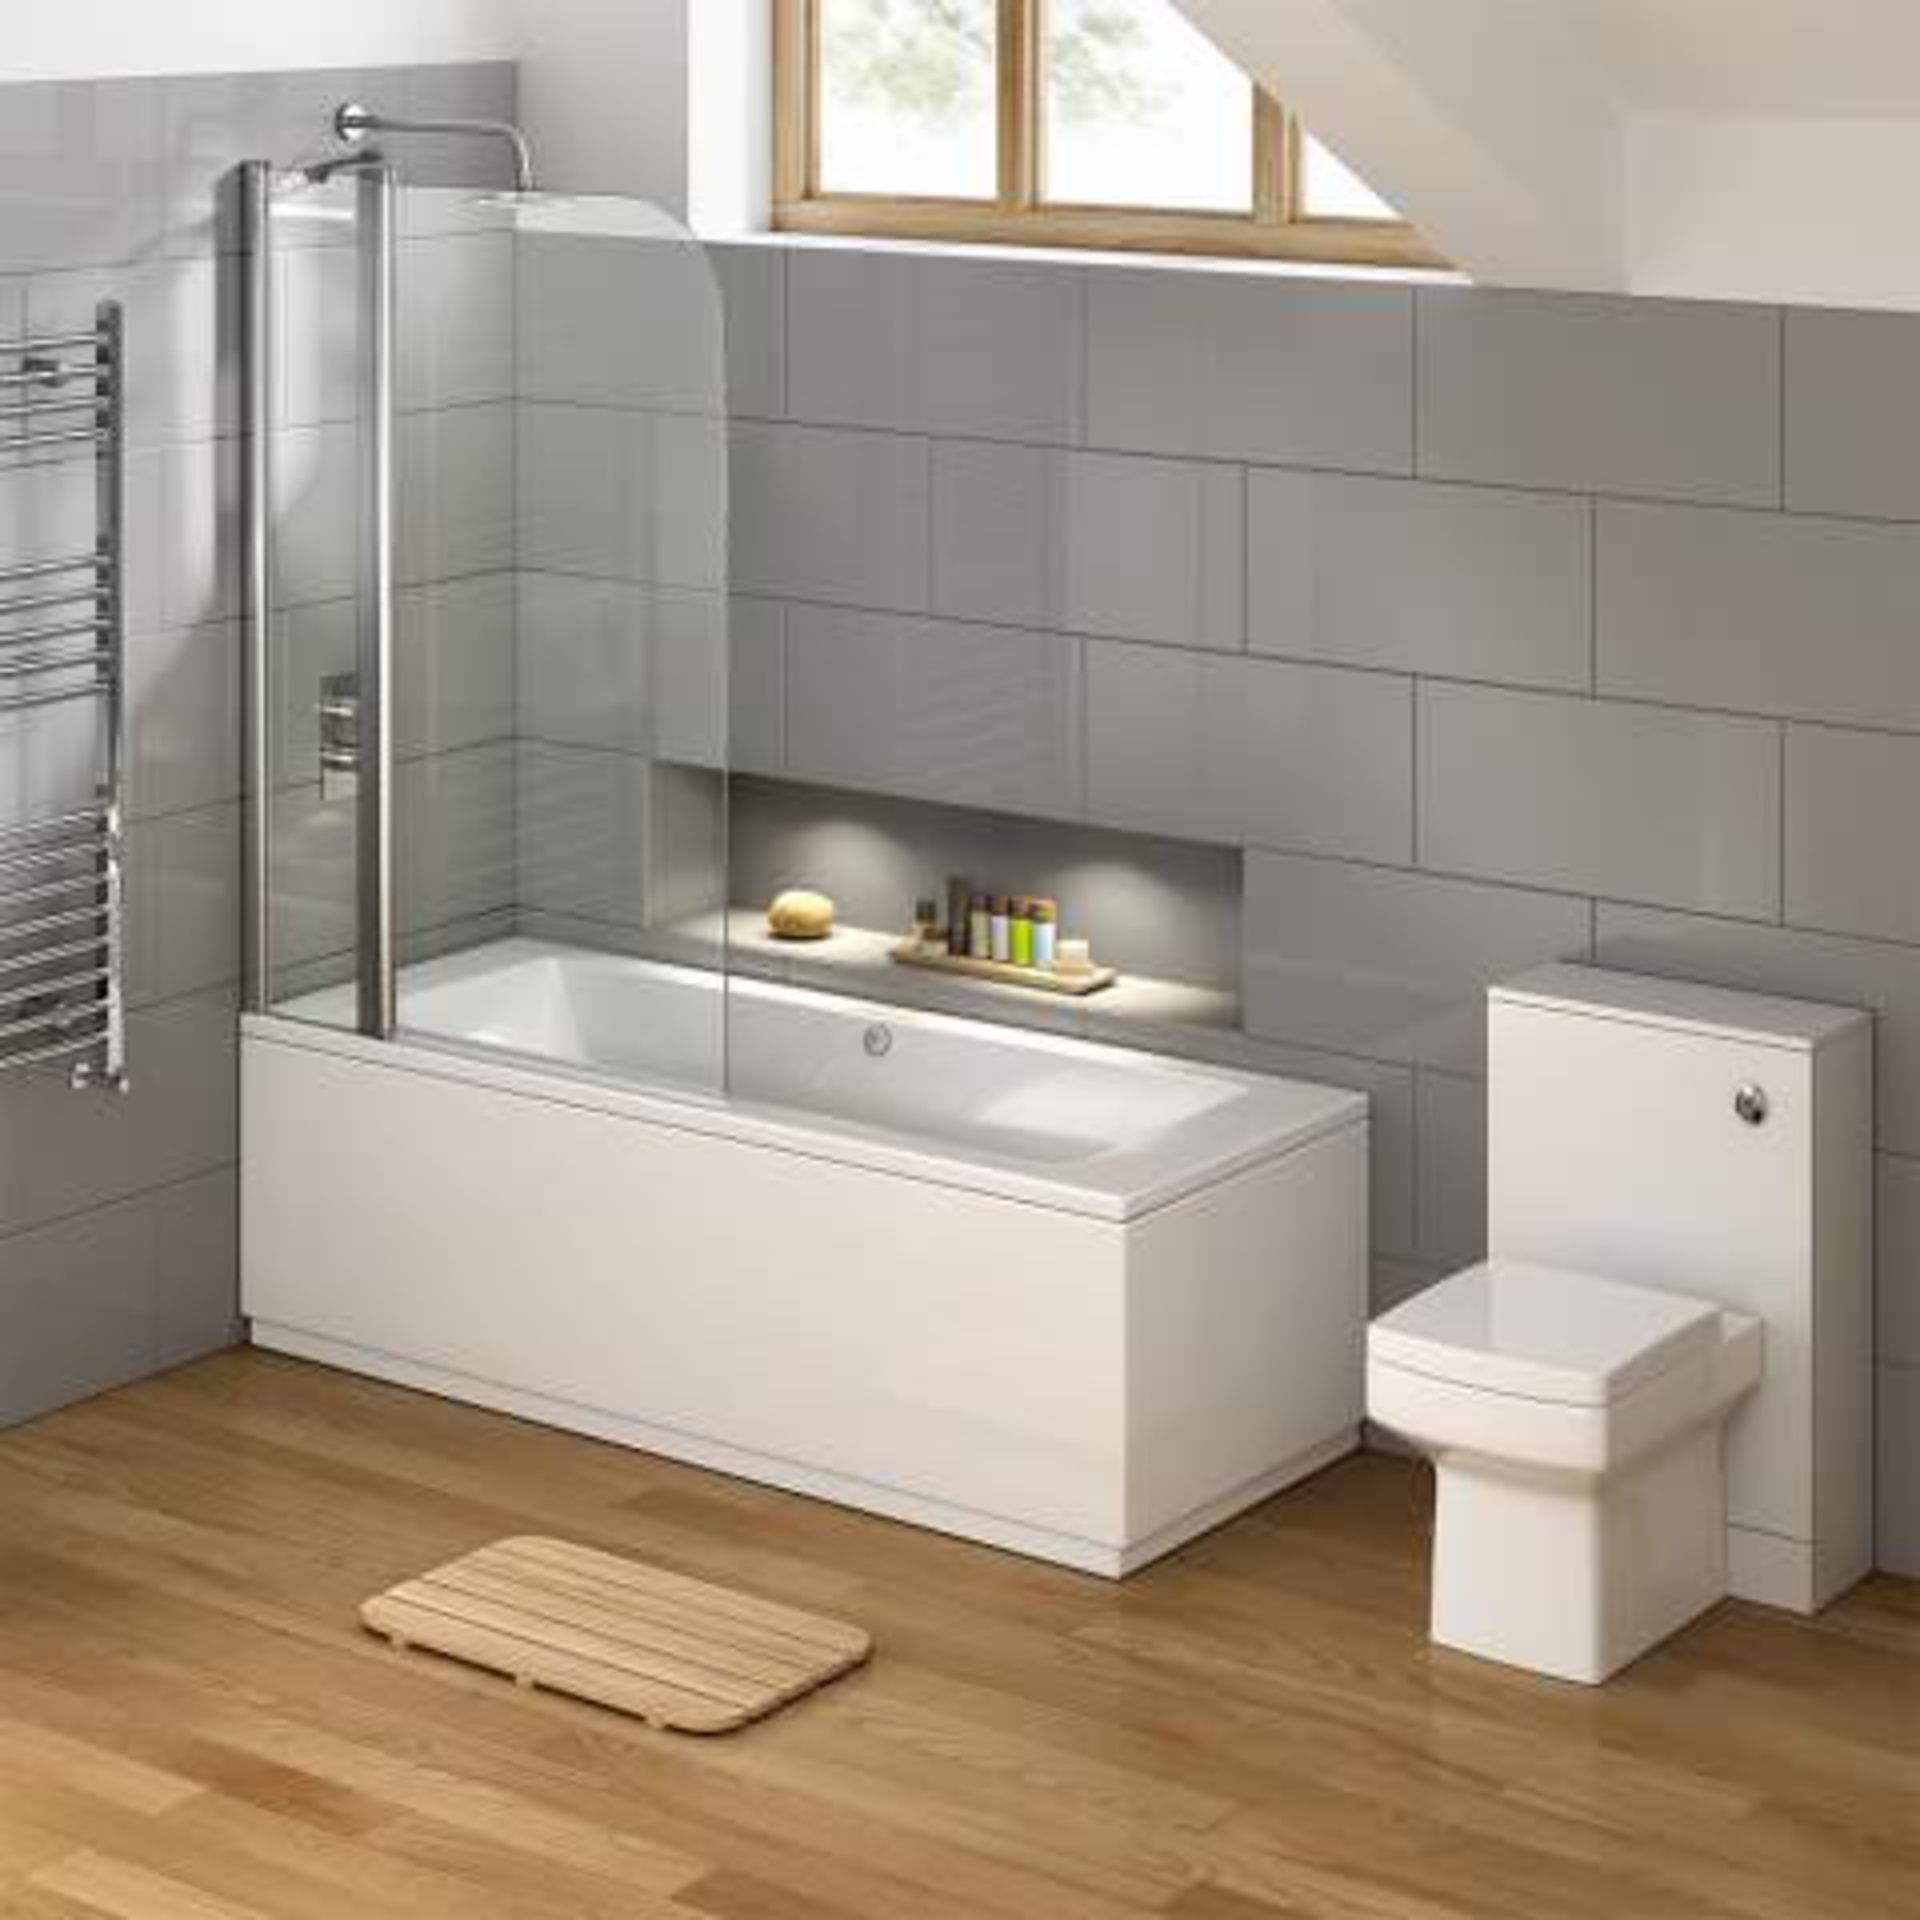 (M109) 1000mm - 6mm - EasyClean Straight Bath Screen. RRP £224.99. The clue is in the name: Easy - Image 2 of 4